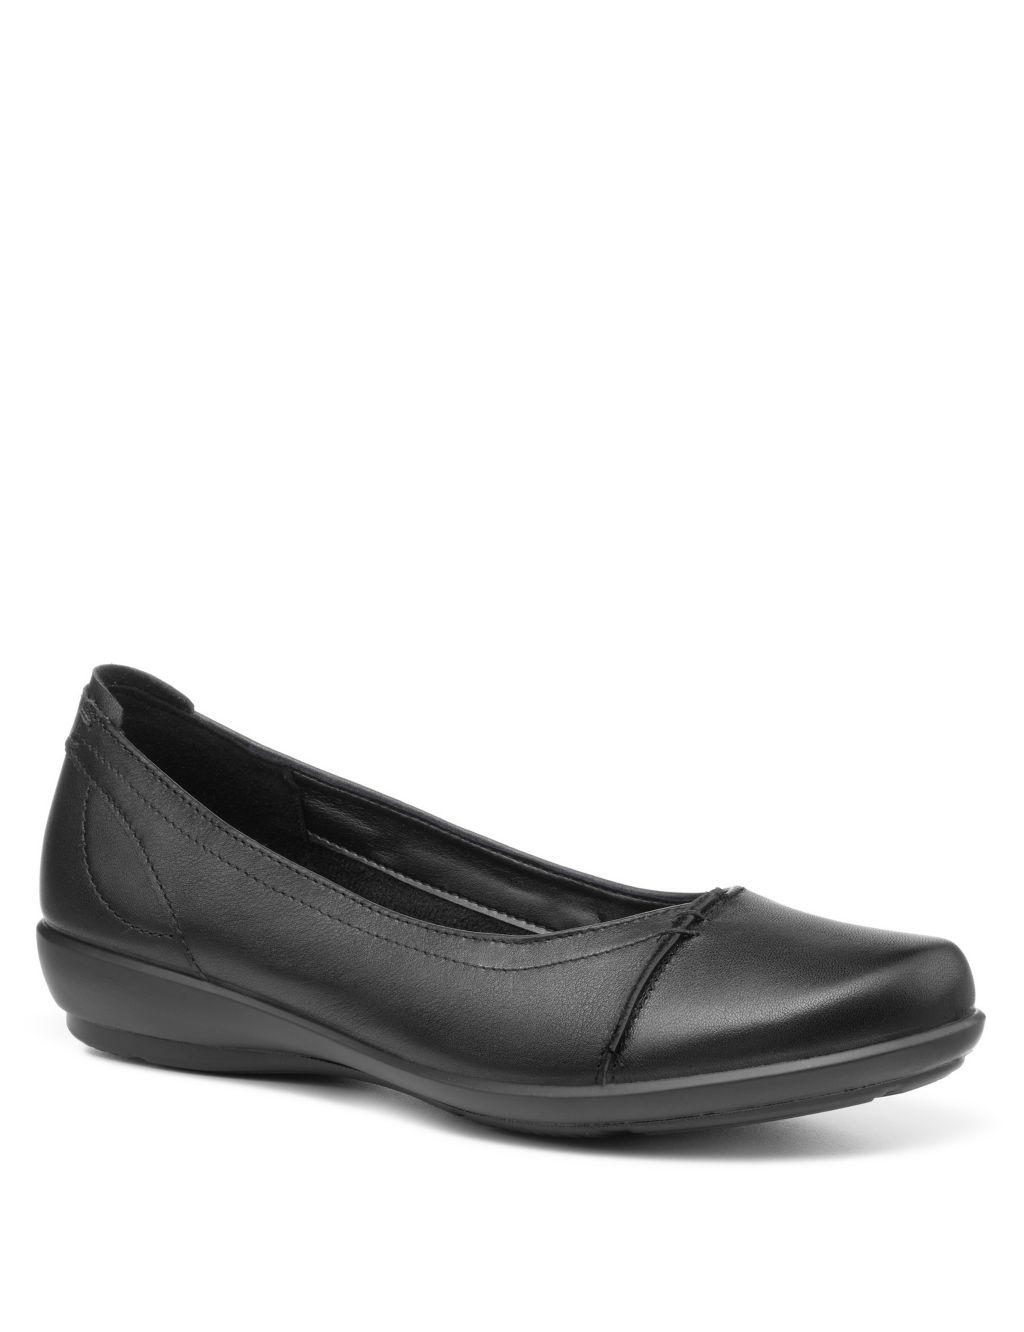 Robyn II Leather Ballet Pumps image 2